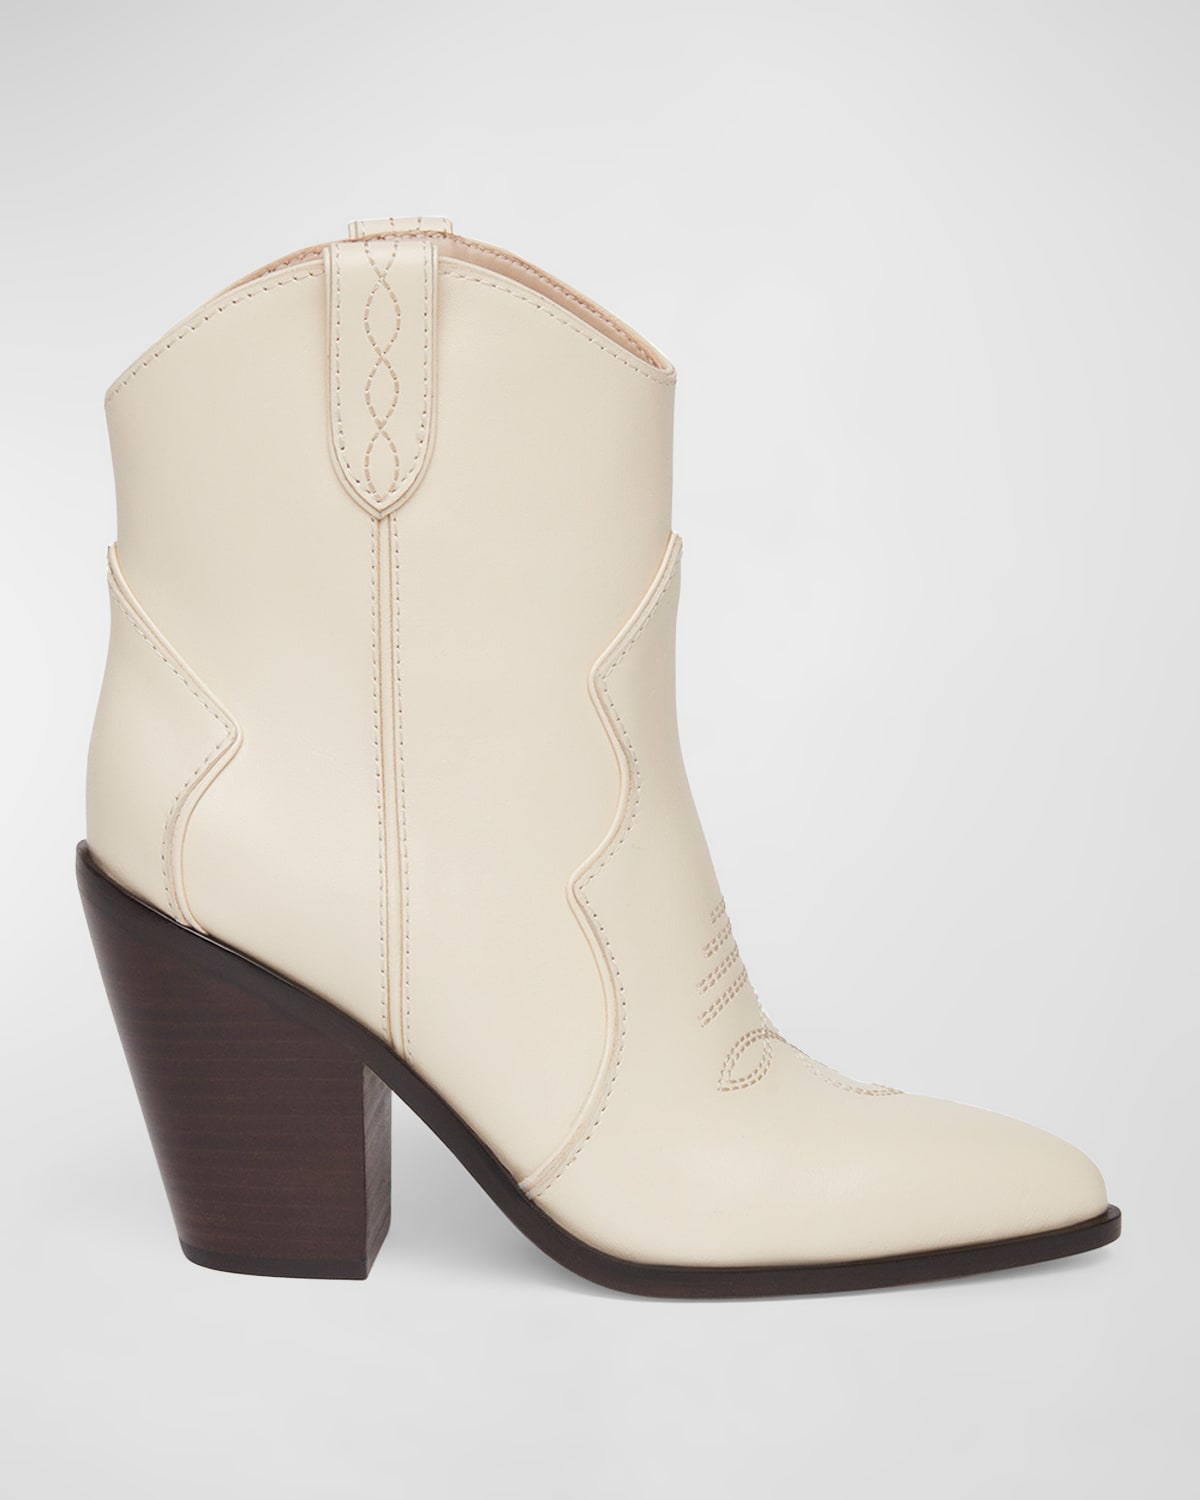 Porter Leather Western Ankle Booties